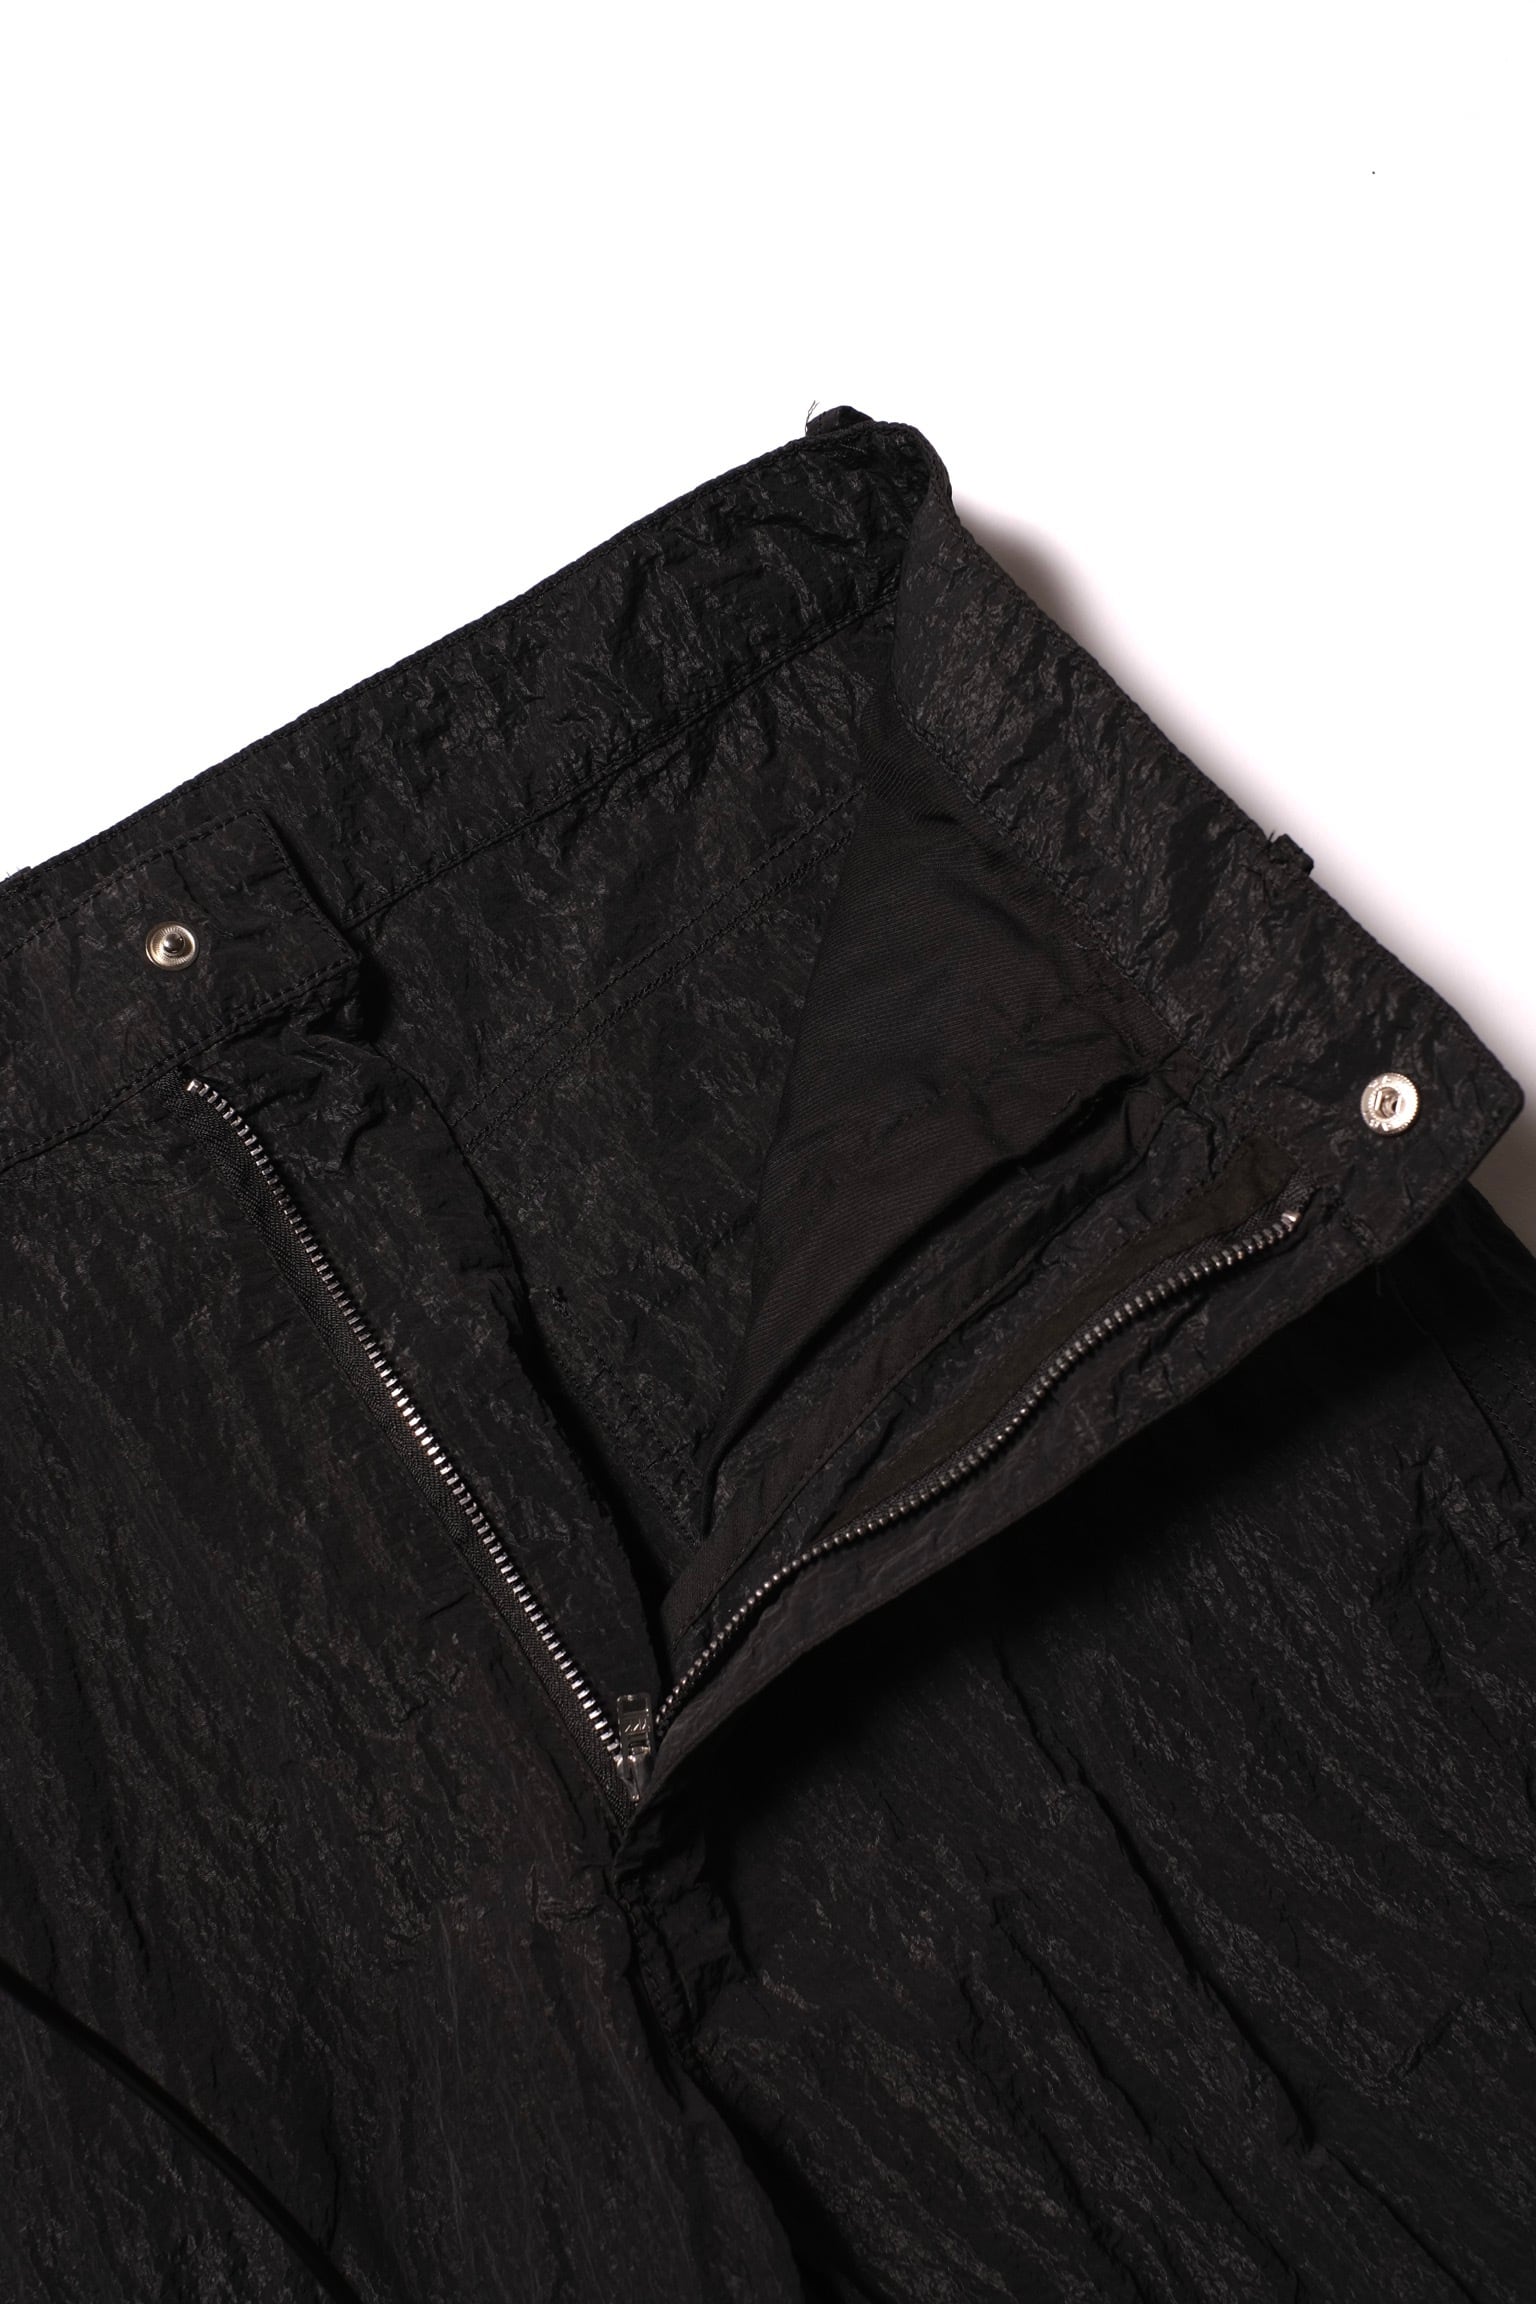 OMAR AFRIDI / 5 PKT TROUSERS | LIVING powered by BASE